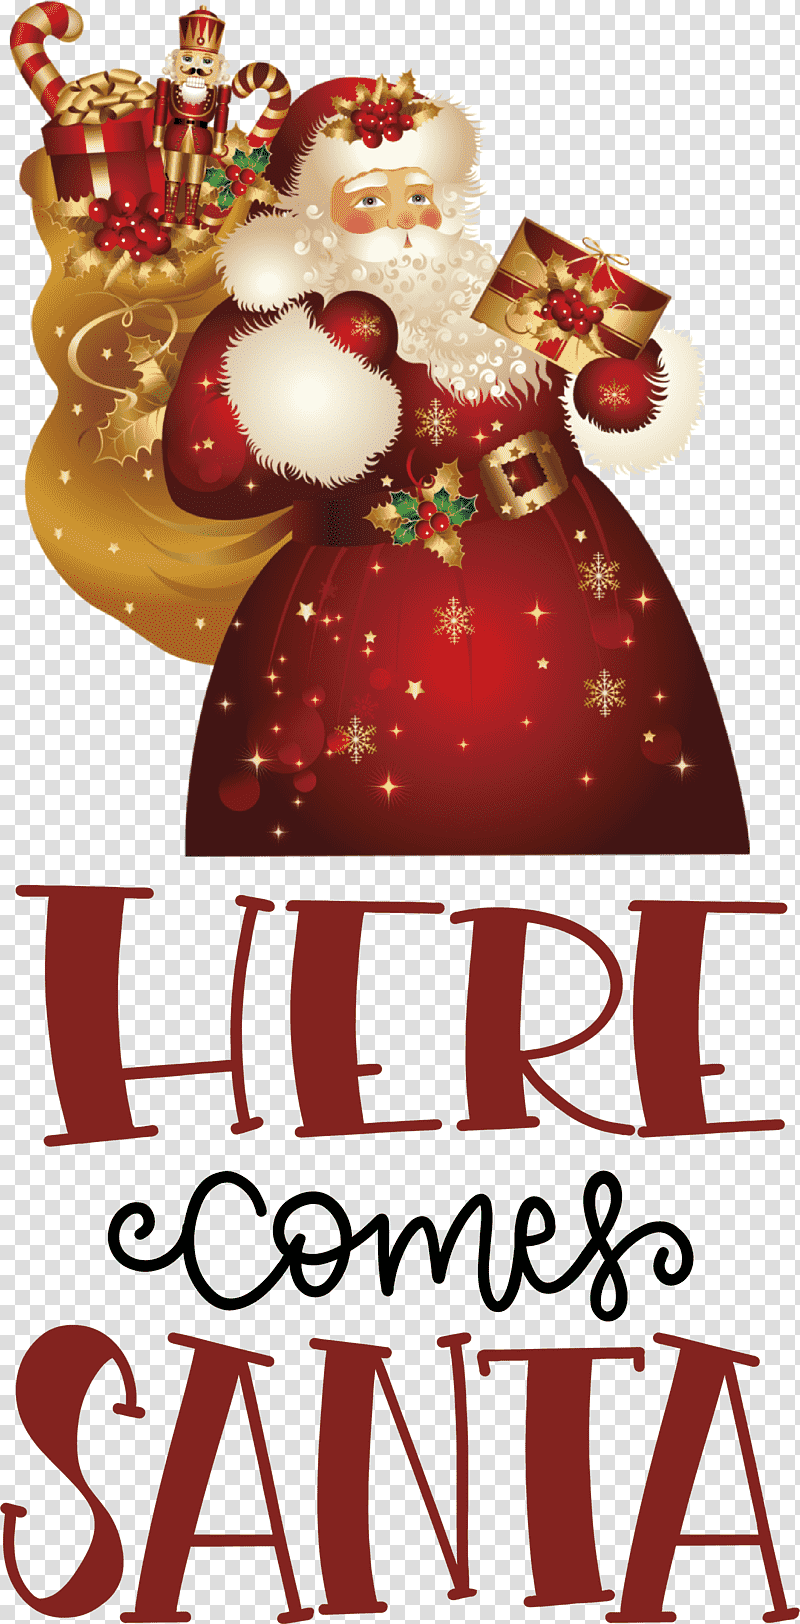 Here Comes Santa Santa Christmas, Christmas , Christmas Day, Cartoon, Santa Claus, Christmas Ornament, Highdefinition Video transparent background PNG clipart